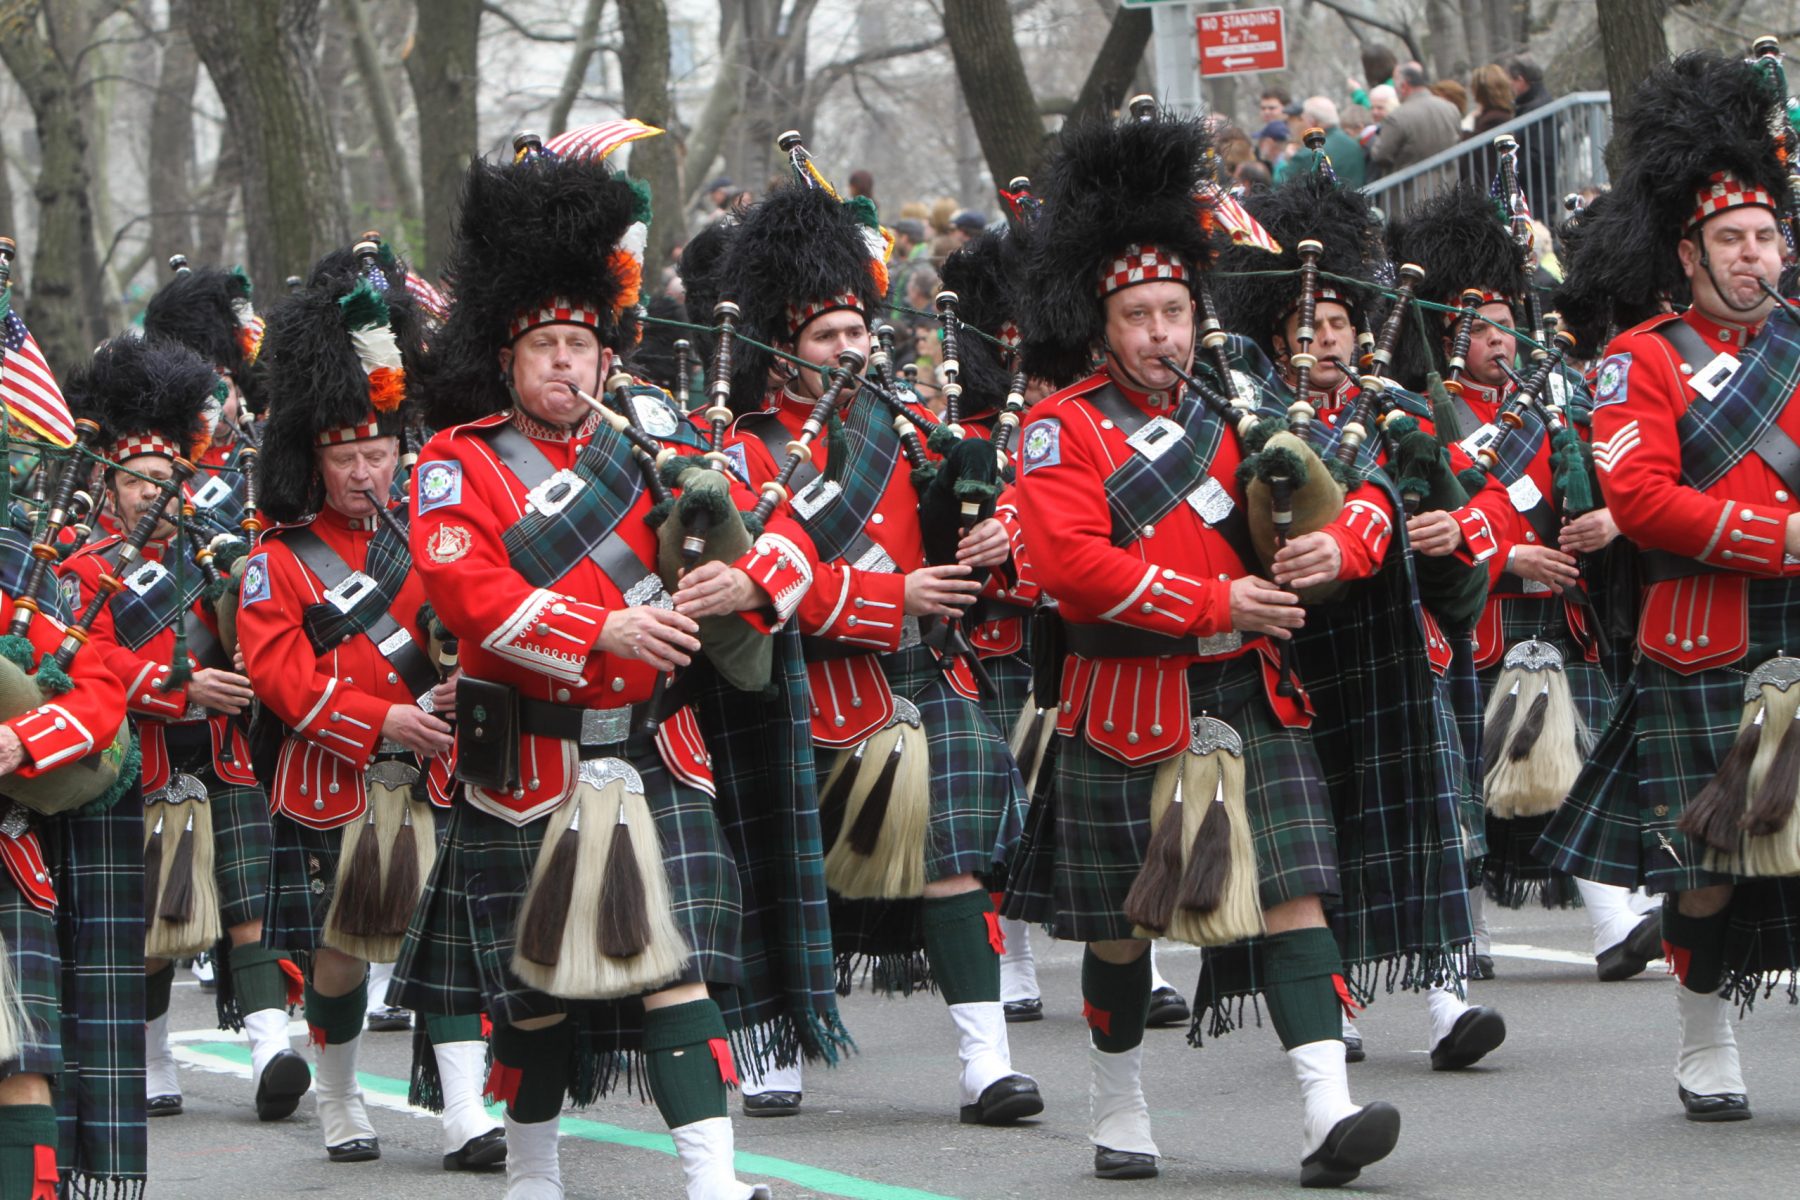 The NYC Parade will be held on Saturday March 16th at 11AM. The Parade begins on 5th Avenue at 44th Street and ends on 5th Avenue at 79th Street.